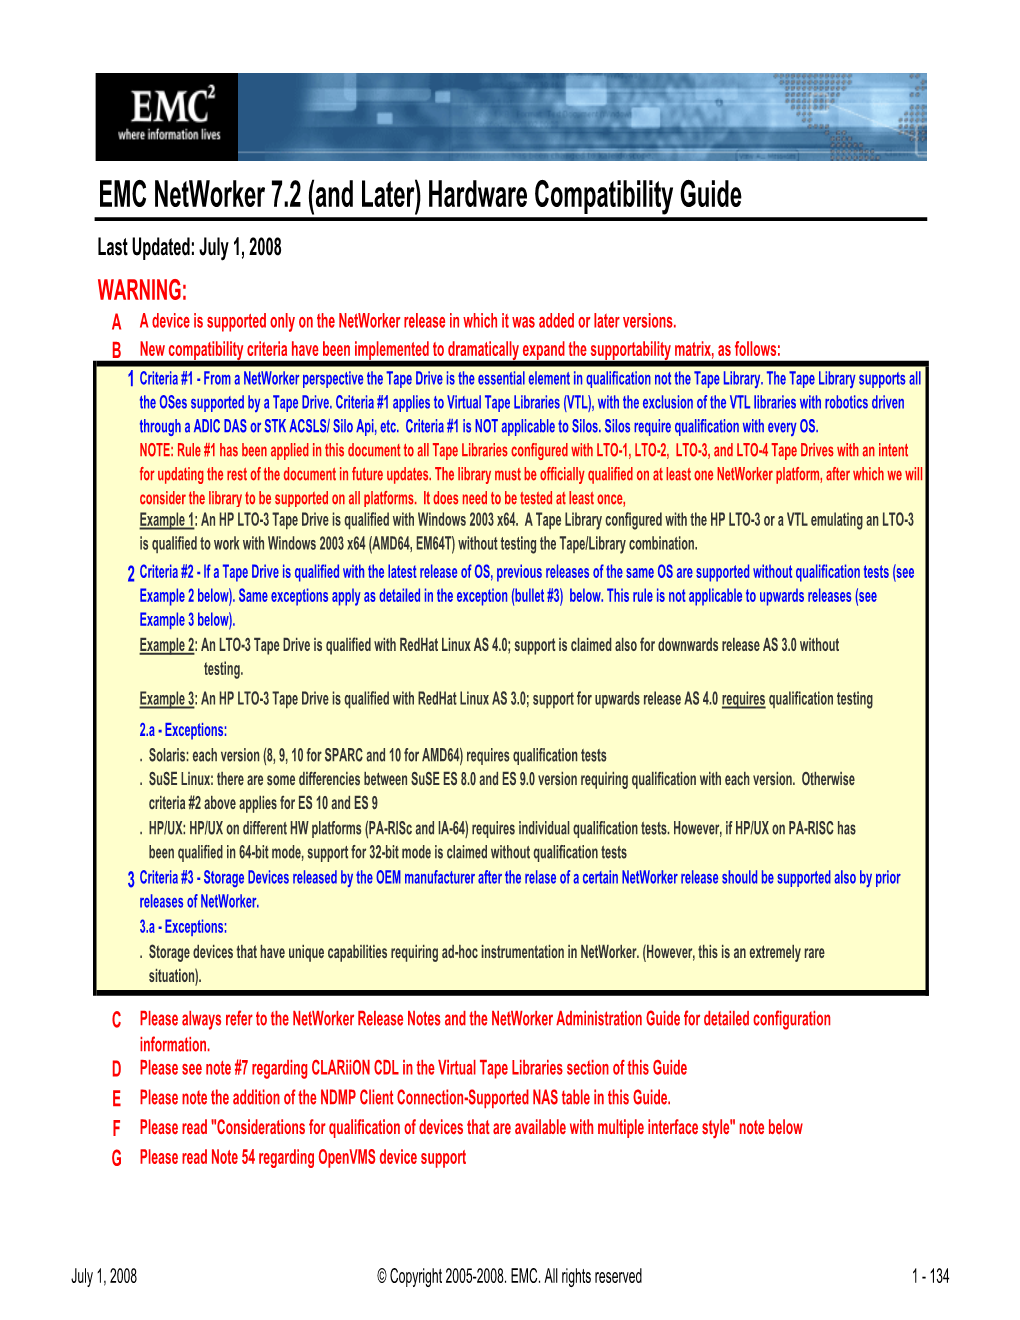 EMC Networker 7.2 (And Later) Hardware Compatibility Guide